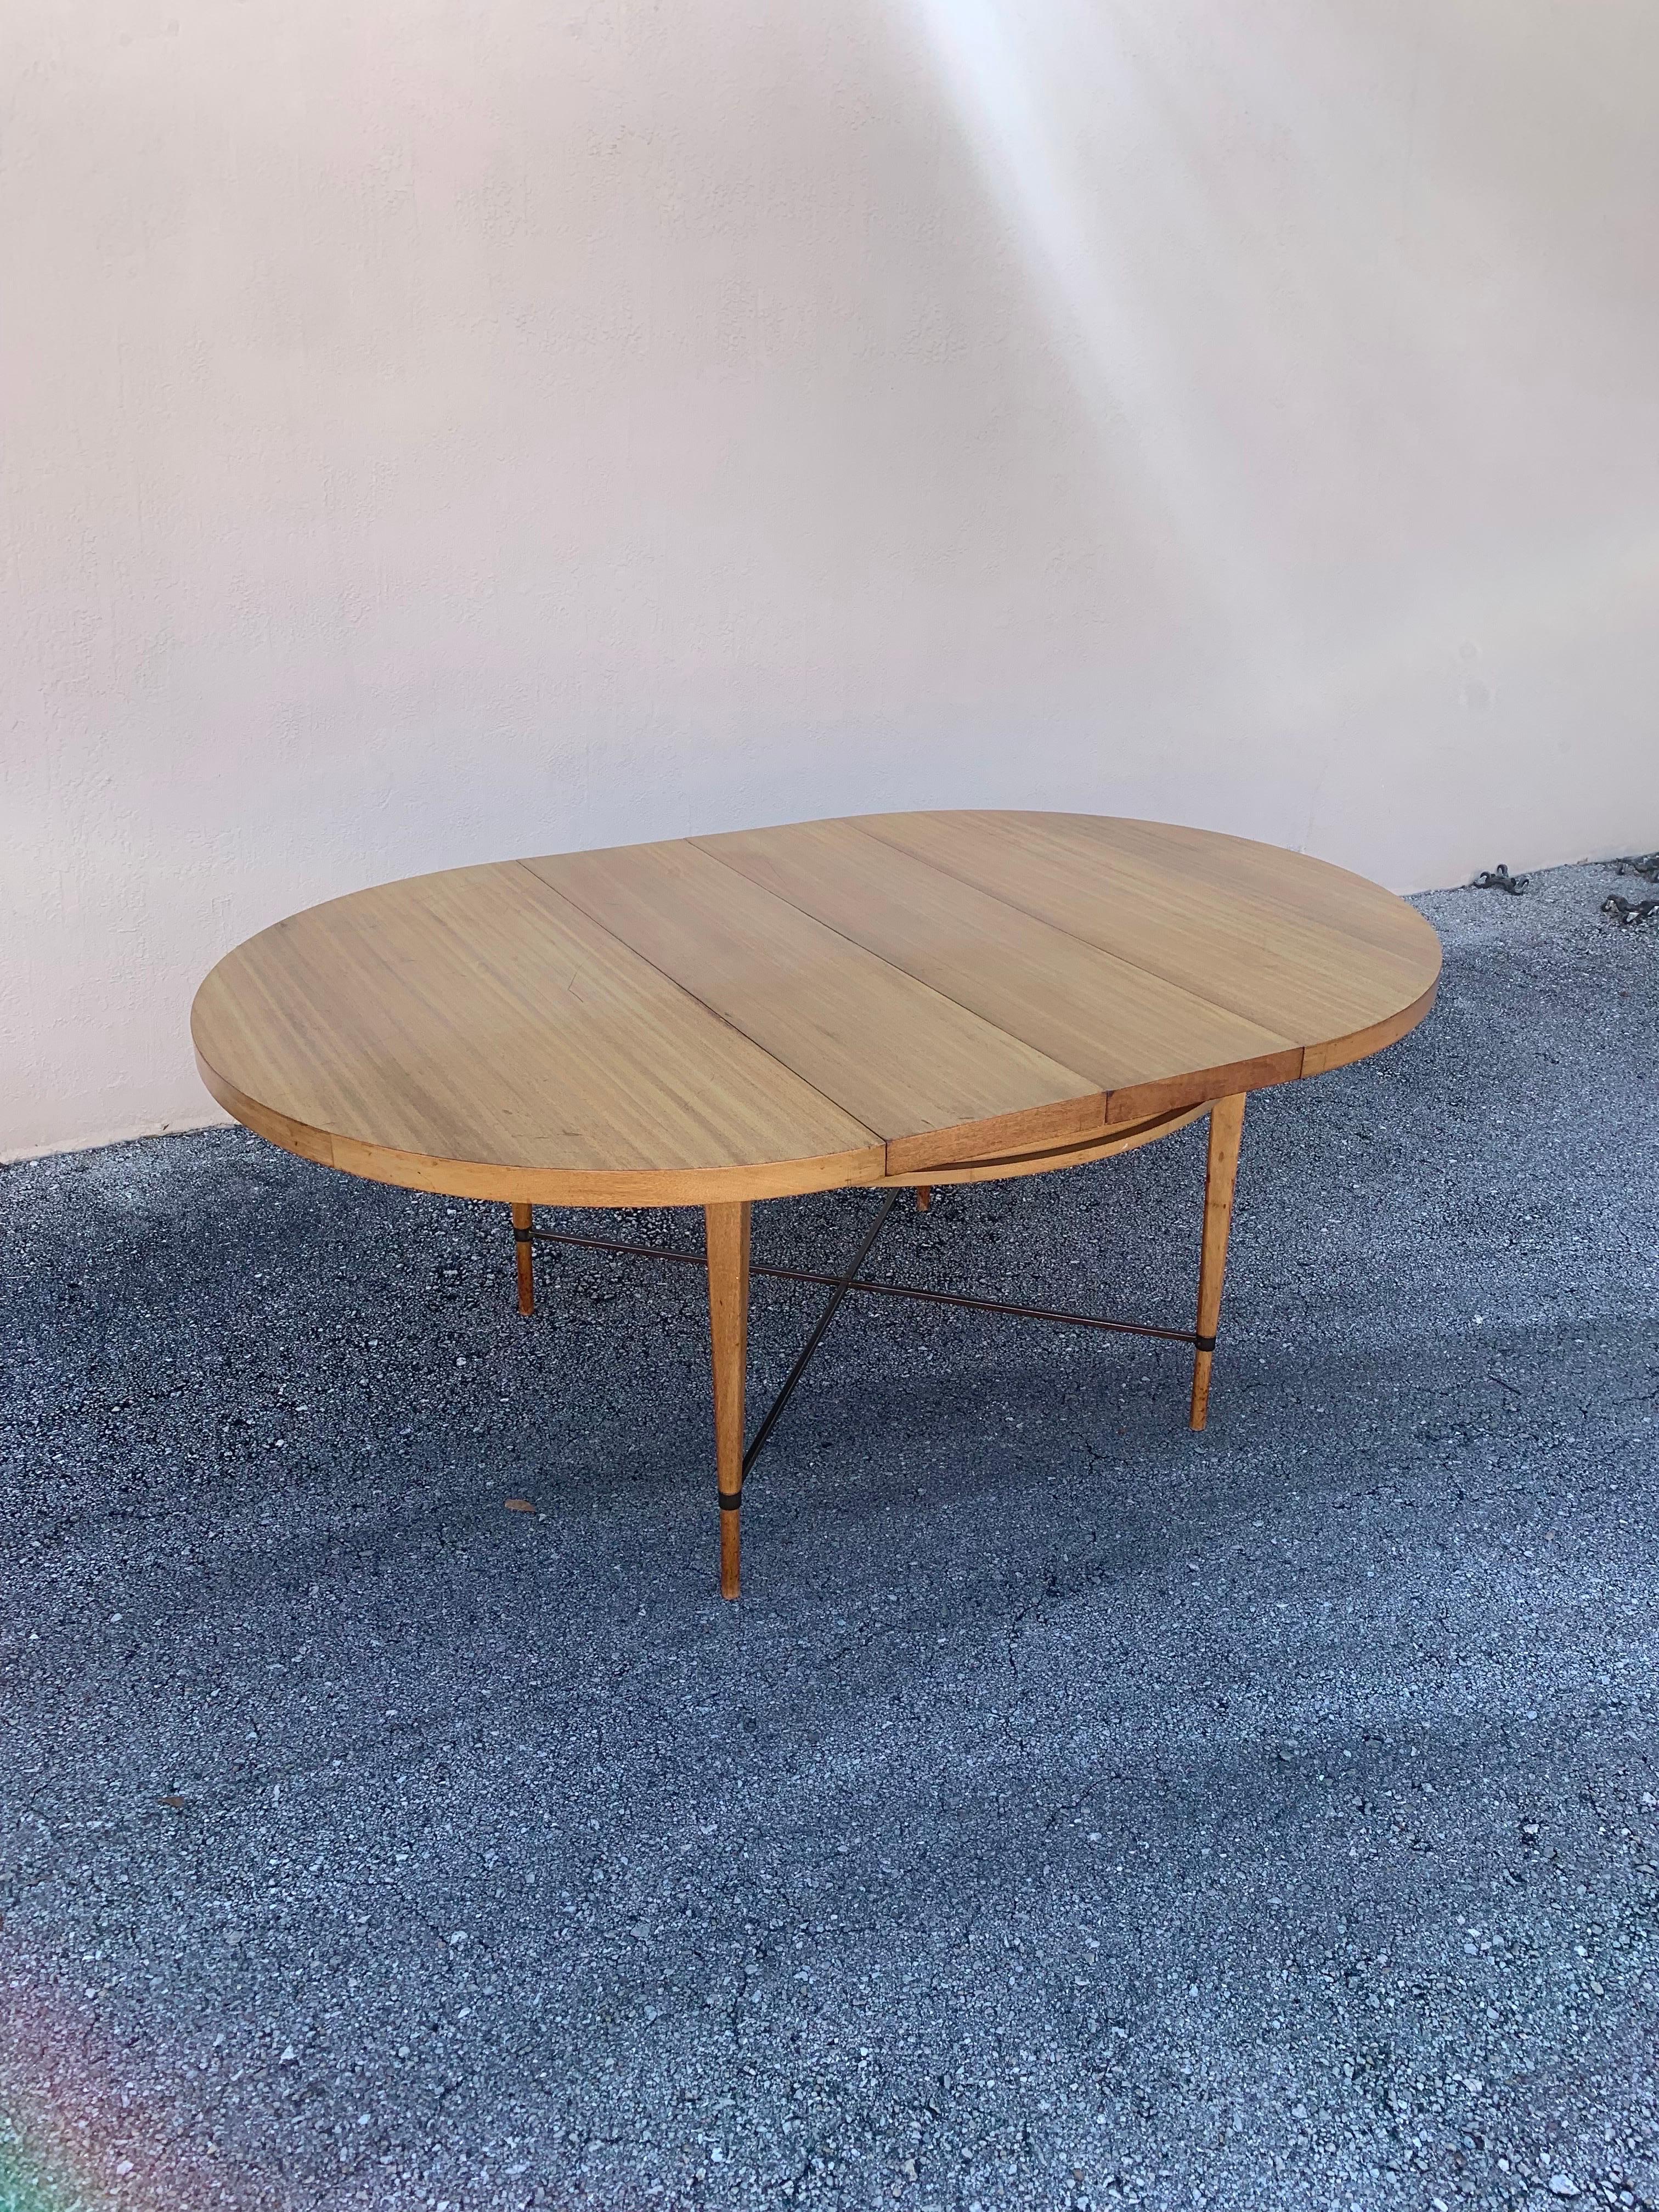 For you interest is a dining table designed by famed designer Paul McCobb. Produced by Calvin as part of the Irwin Collection. A round table with out the leafs and a larger dining table with the leafs. Two leafs total at 12” each. 

Table is